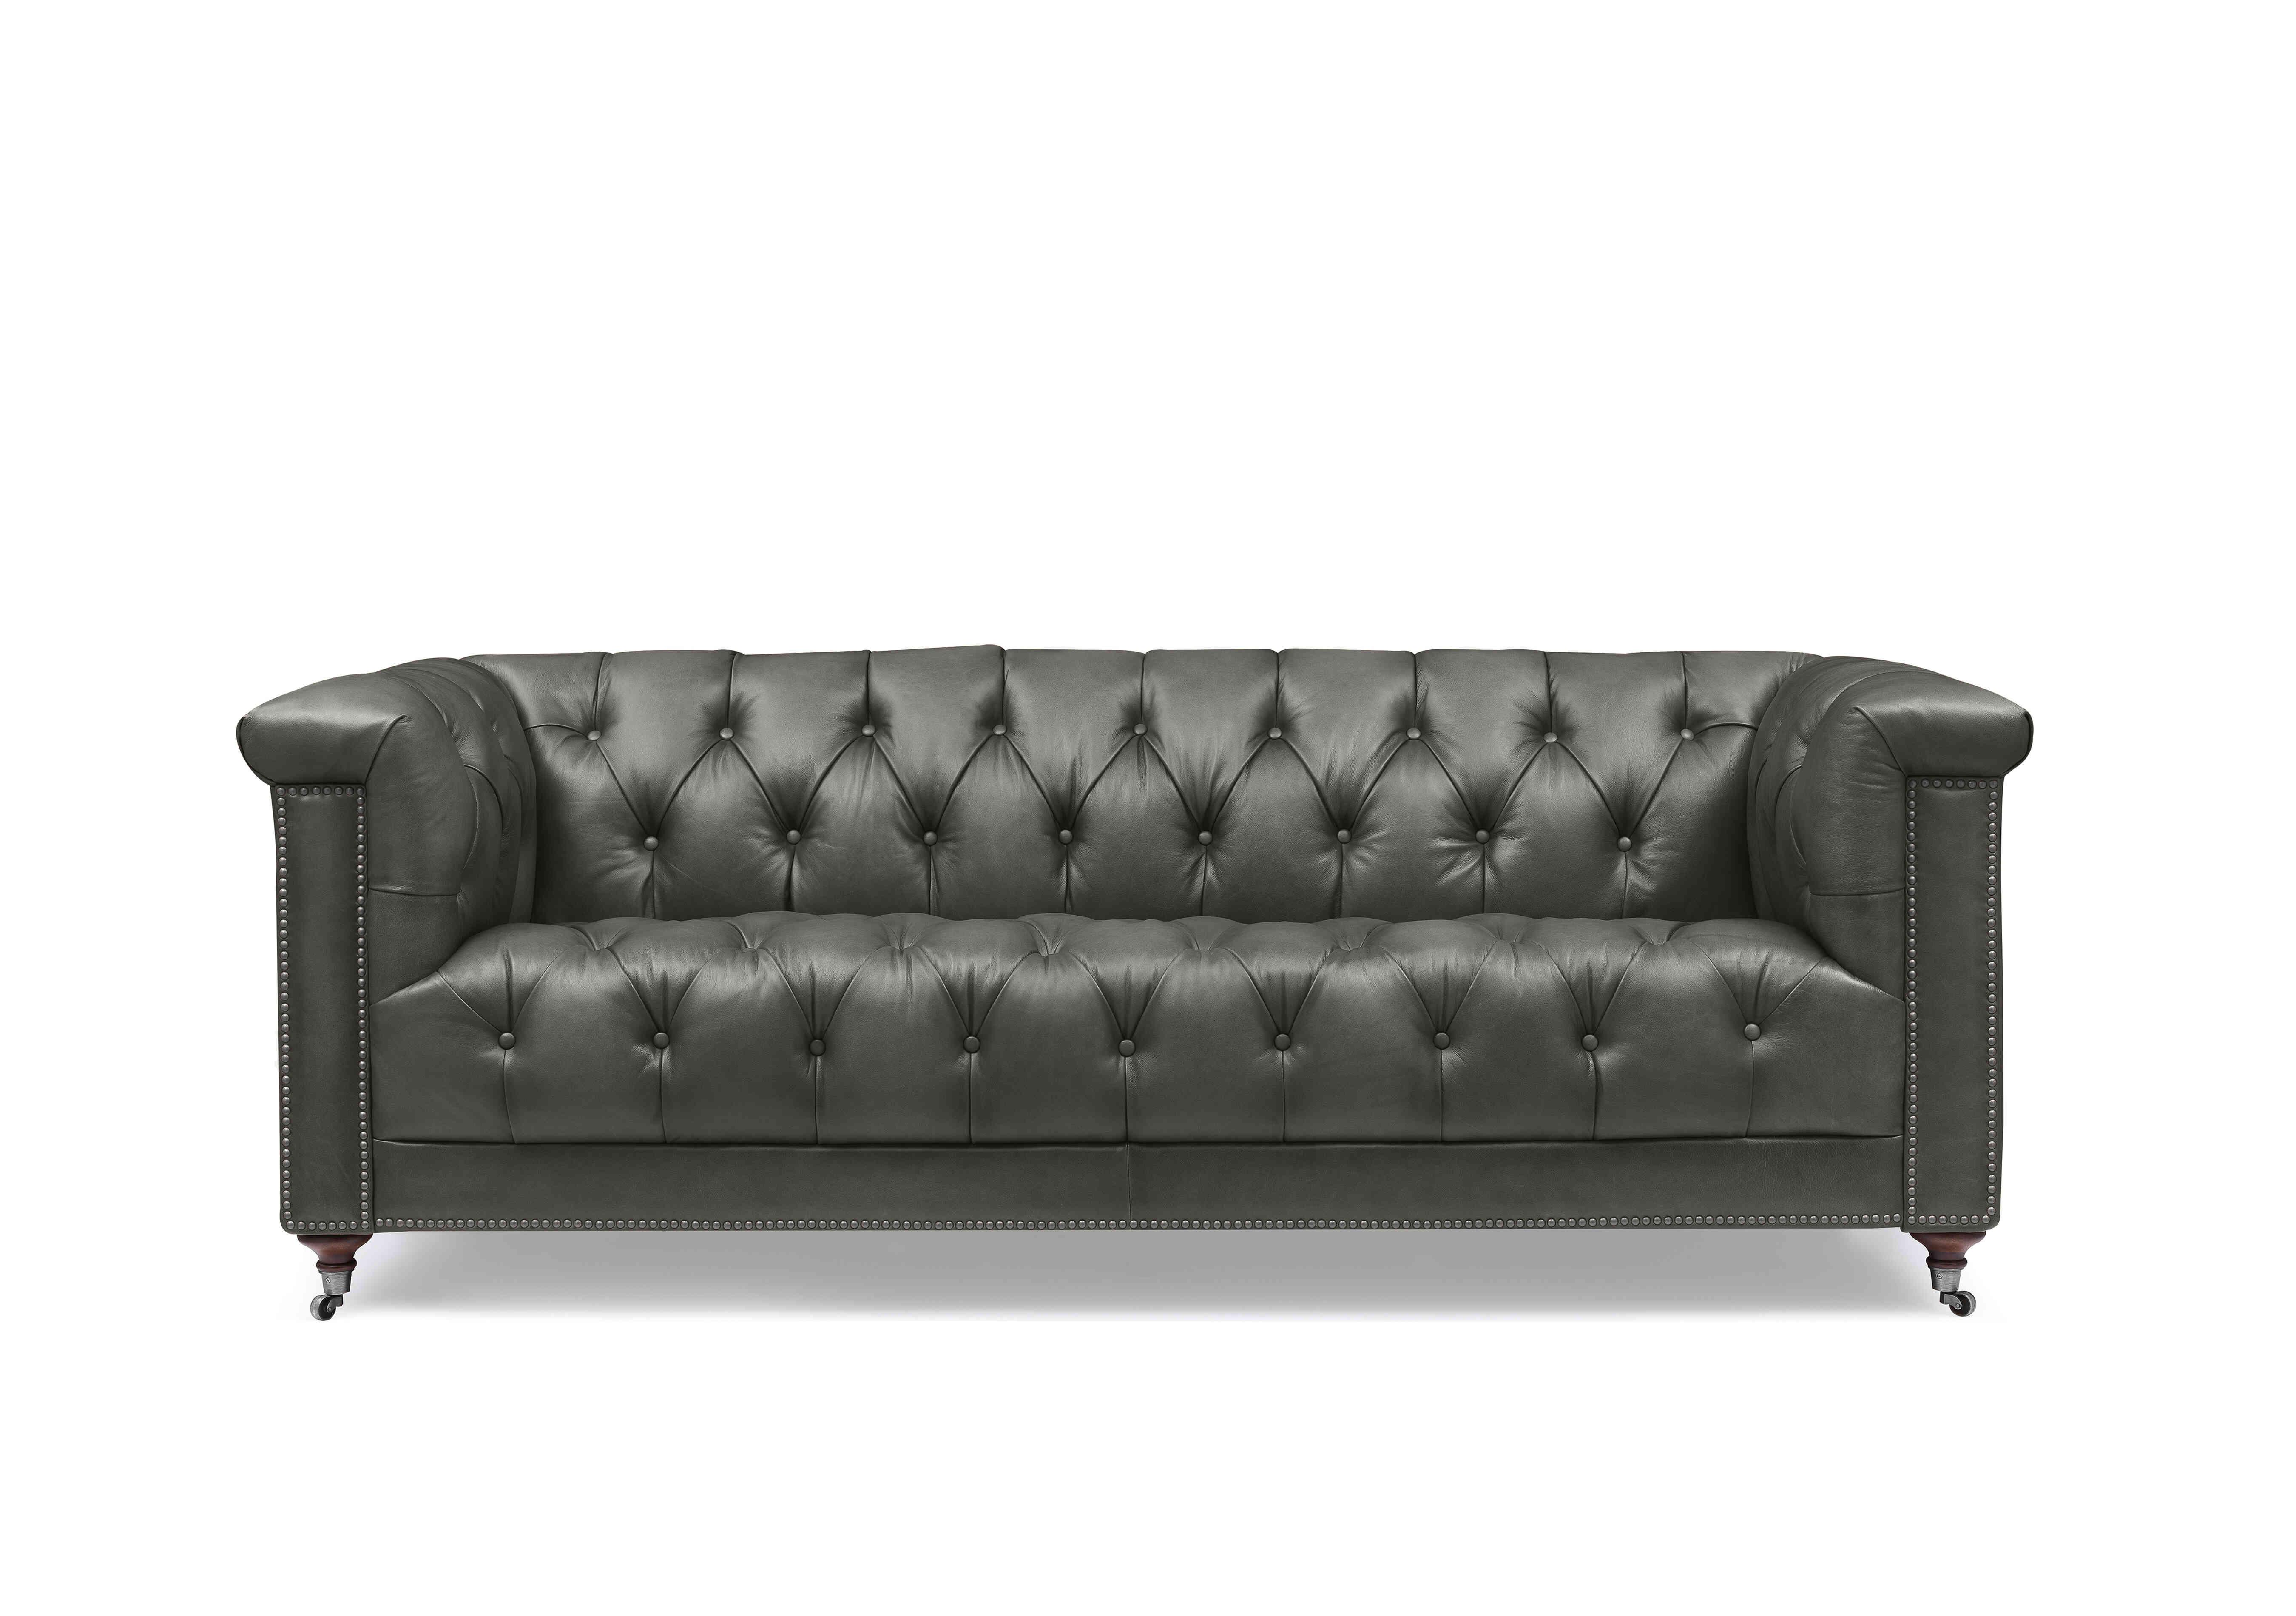 Wallace 3 Seater Leather Chesterfield Sofa in X3y2-1966ls Granite on Furniture Village